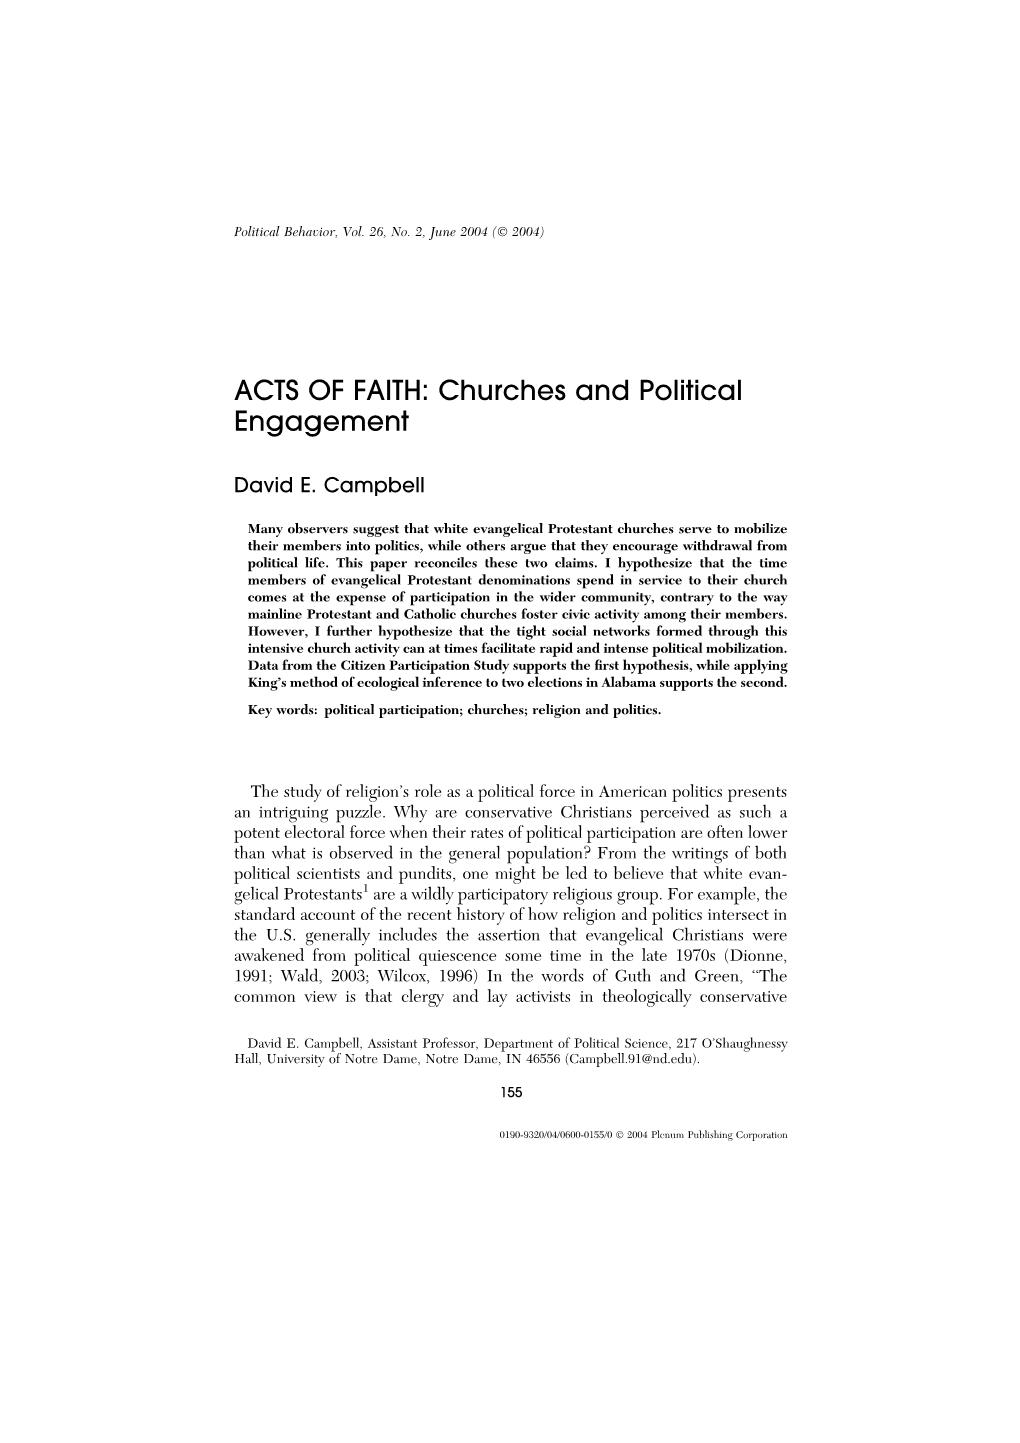 ACTS of FAITH: Churches and Political Engagement